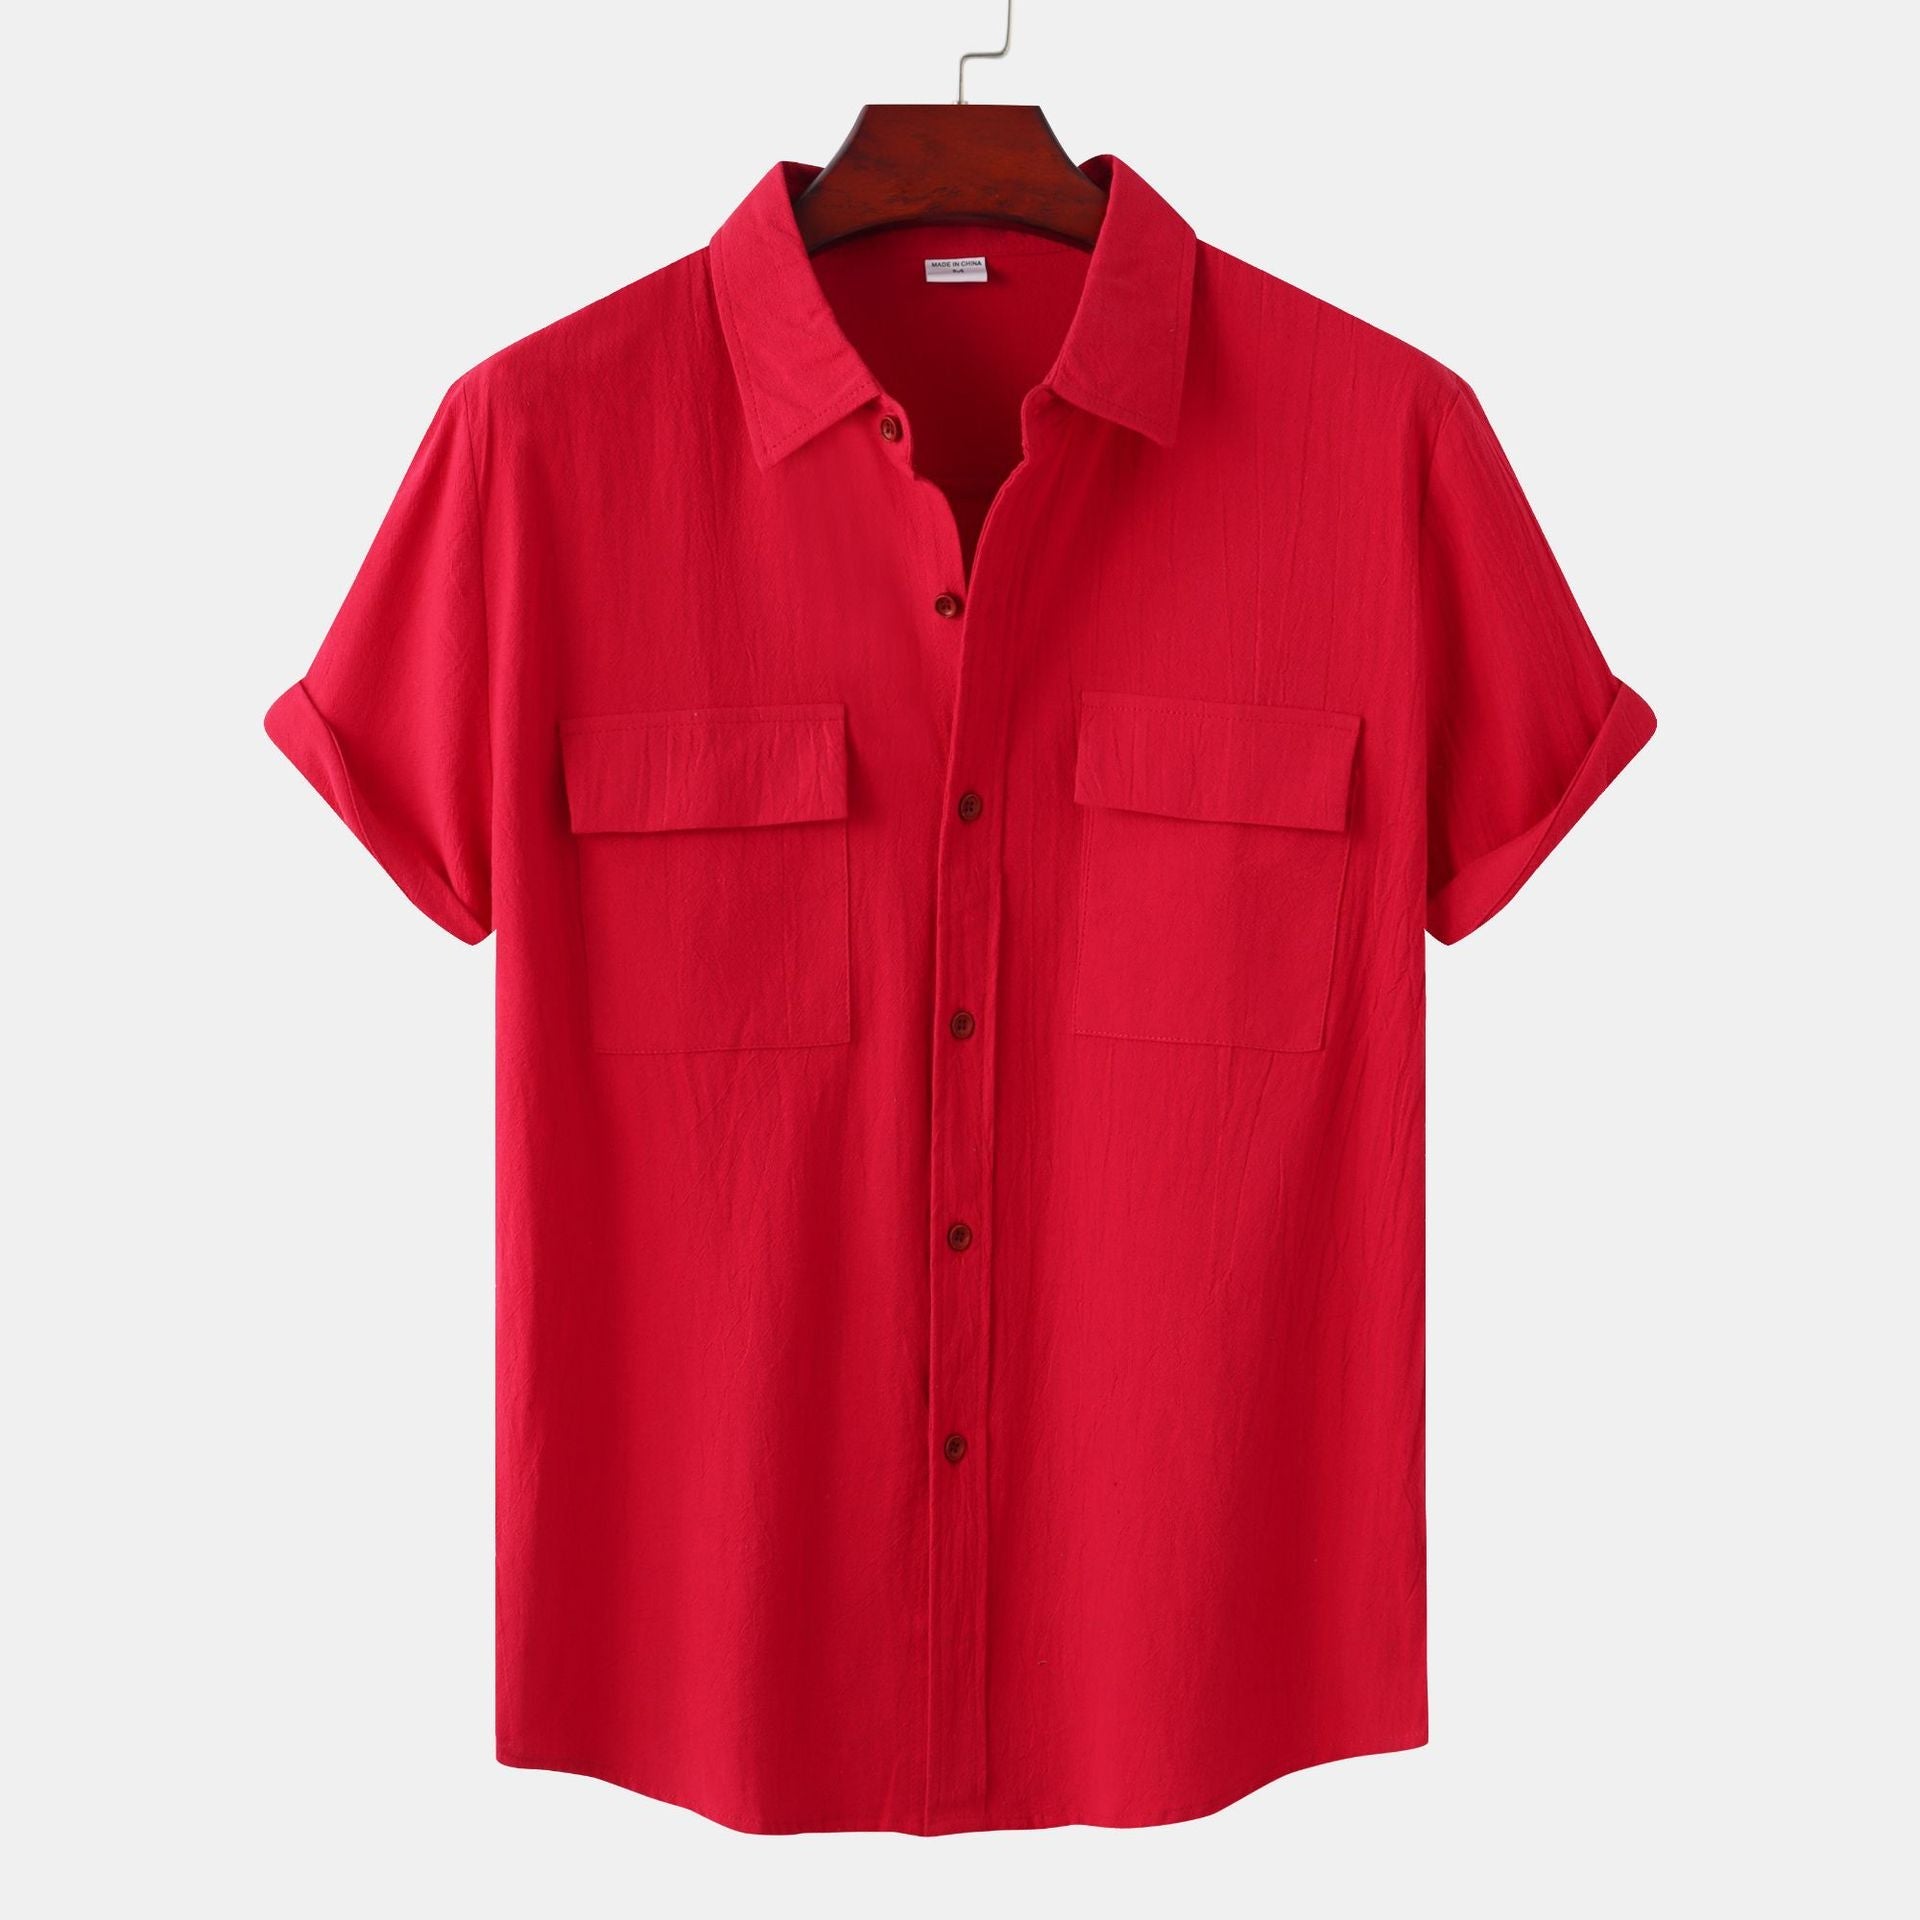 New Cotton And Linen Short-Sleeved Shirts